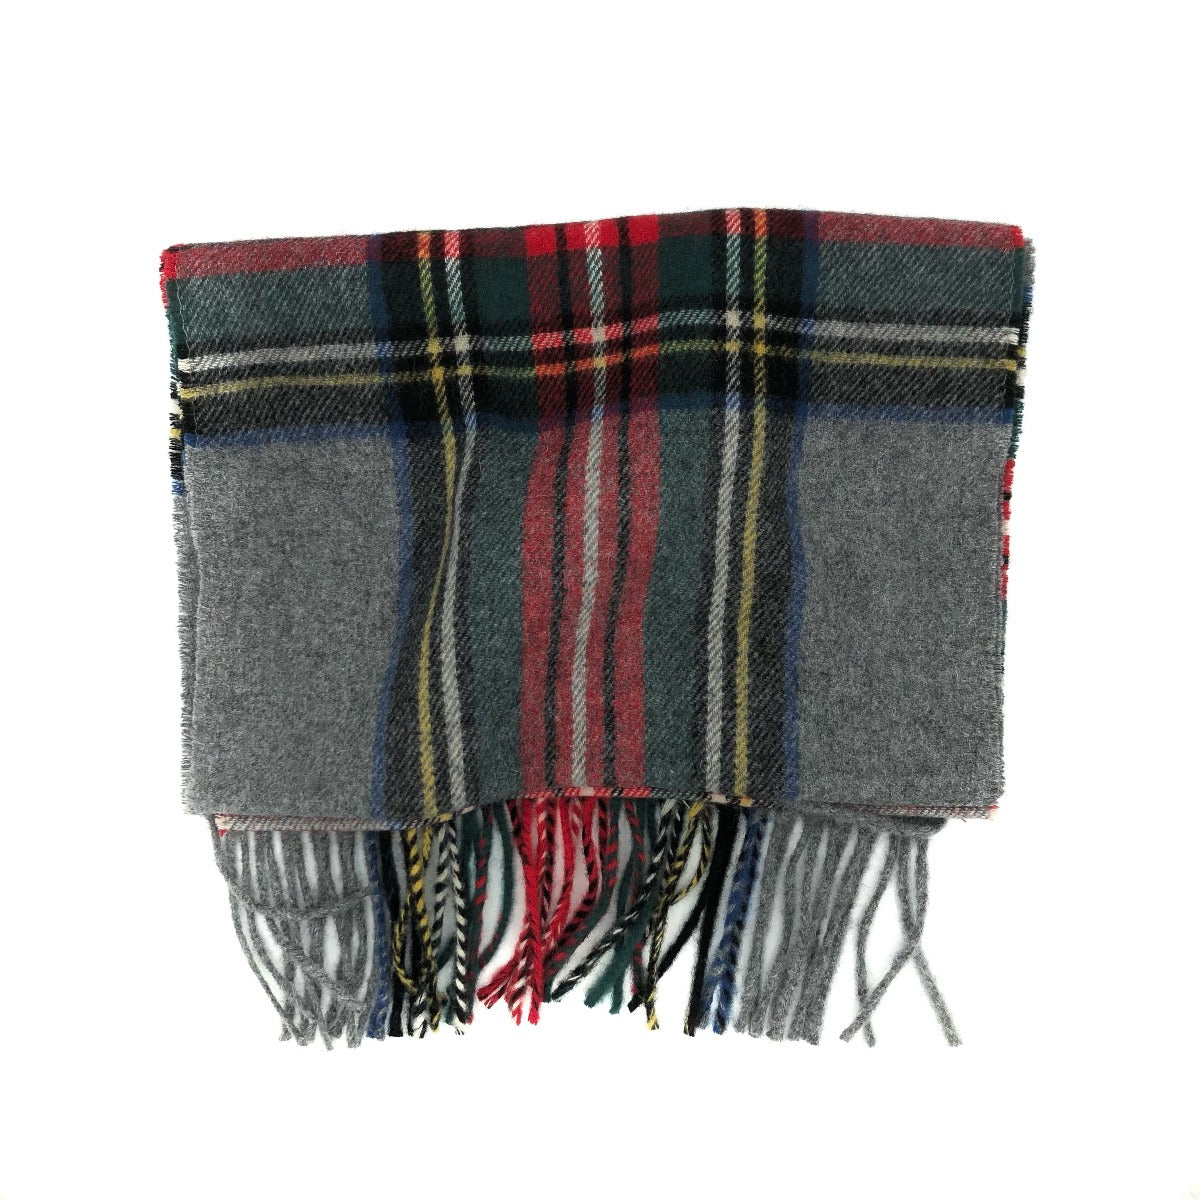 Wool unisex scarf designed and produced exclusively by Regent featuring a classic tartan patterning and made by craftsmen in Italy. 